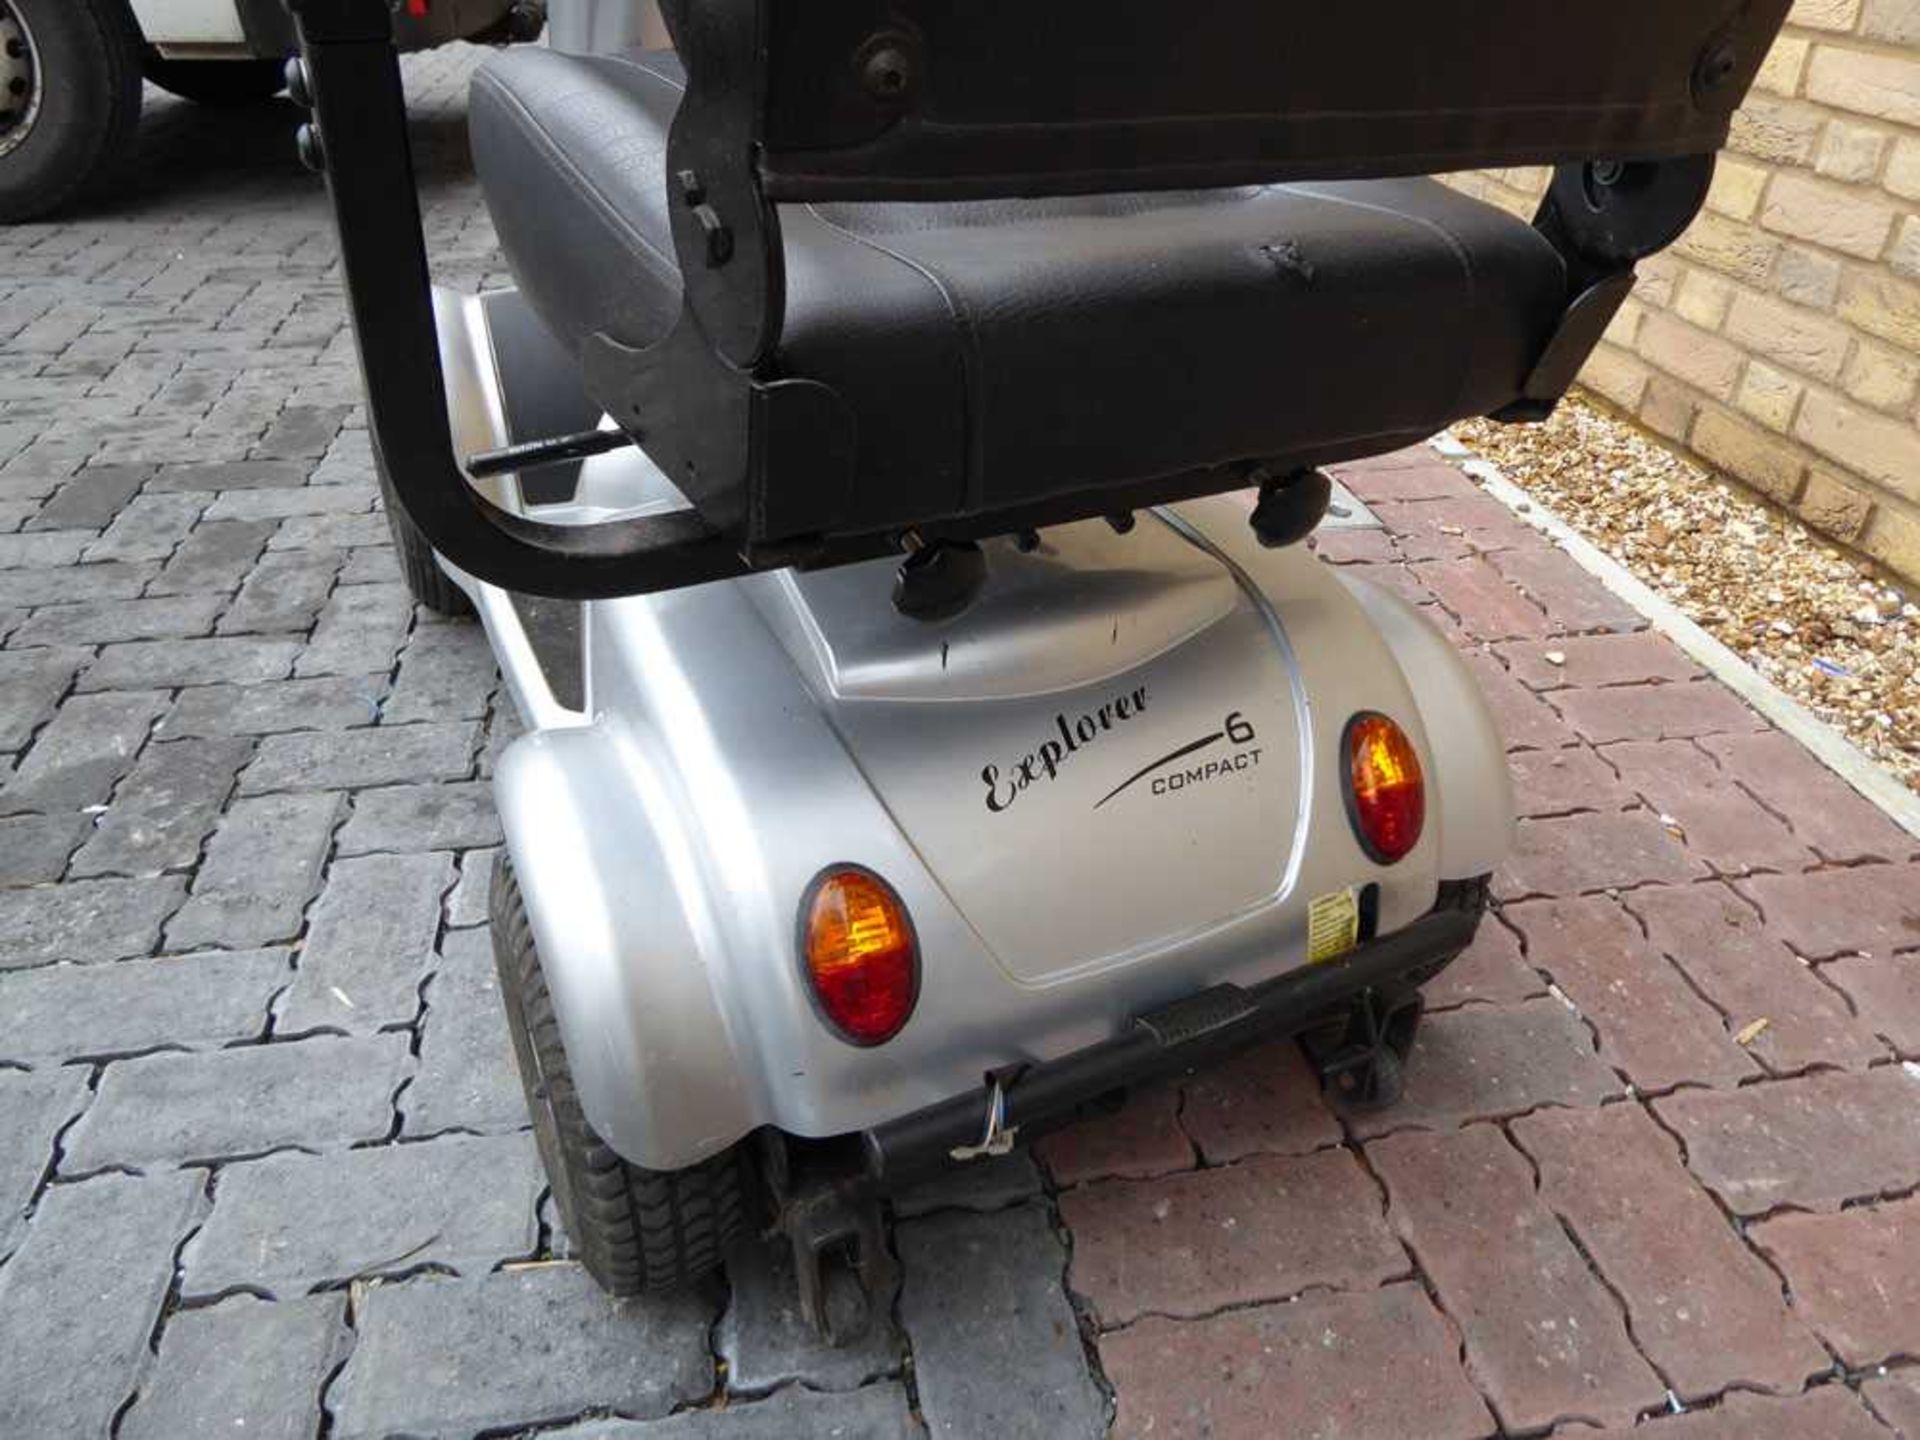 Prestige 4 wheel mobility scooter with key and charger - Image 4 of 4